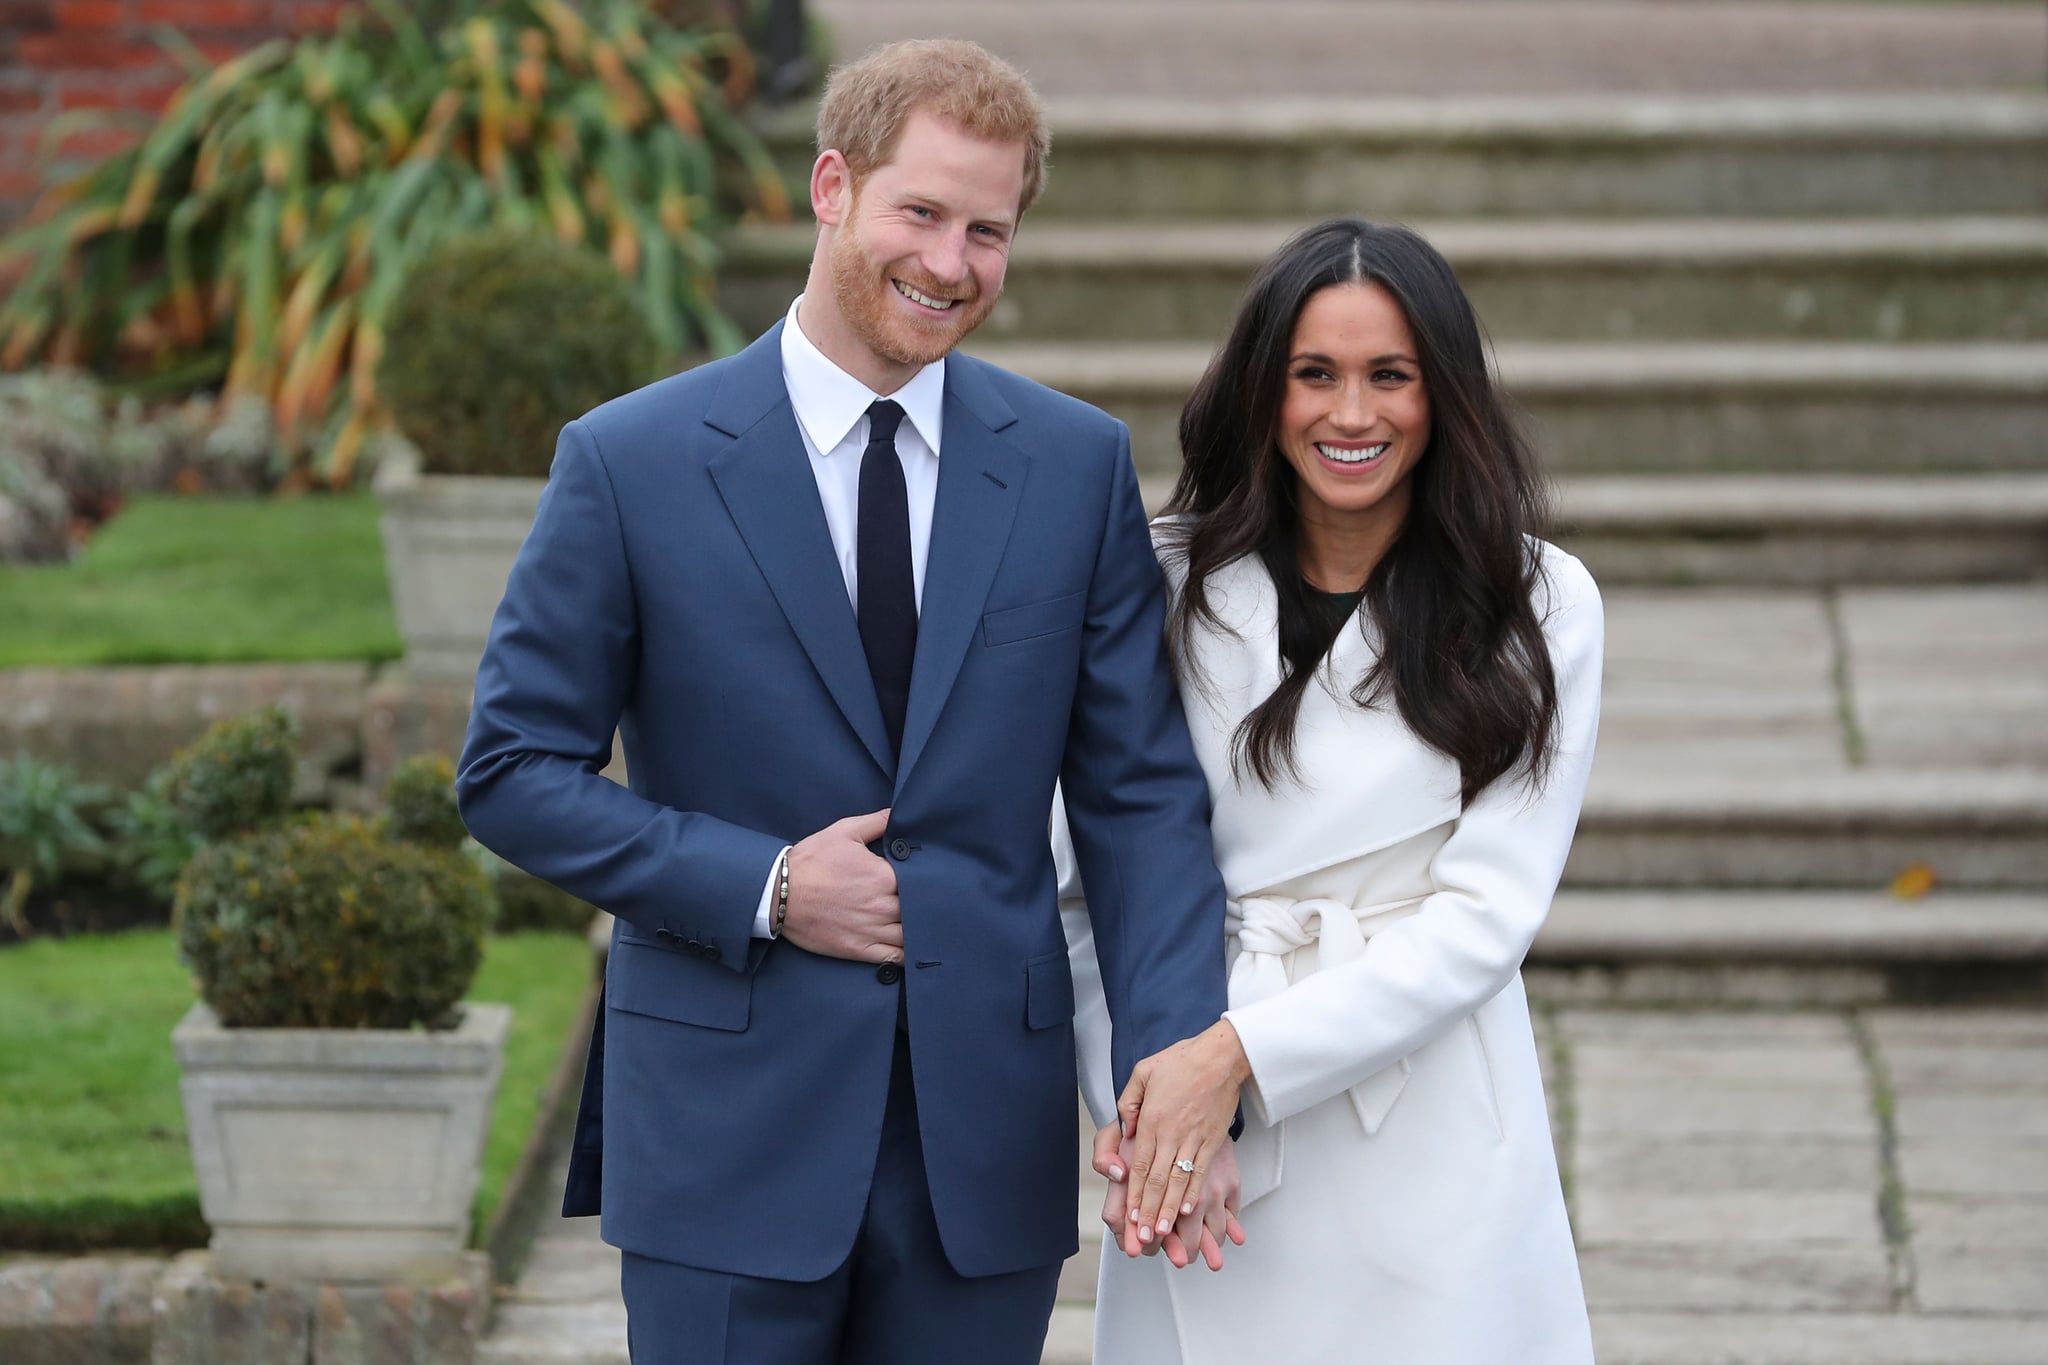 Britain's Prince Harry and his fiancée US actress Meghan Markle pose for a photograph in the Sunken Garden at Kensington Palace in west London on November 27, 2017, following the announcement of their engagement.Britain's Prince Harry will marry his US actress girlfriend Meghan Markle early next year after the couple became engaged earlier this month, Clarence House announced on Monday. / AFP PHOTO / Daniel LEAL-OLIVAS        (Photo credit should read DANIEL LEAL-OLIVAS/AFP/Getty Images)